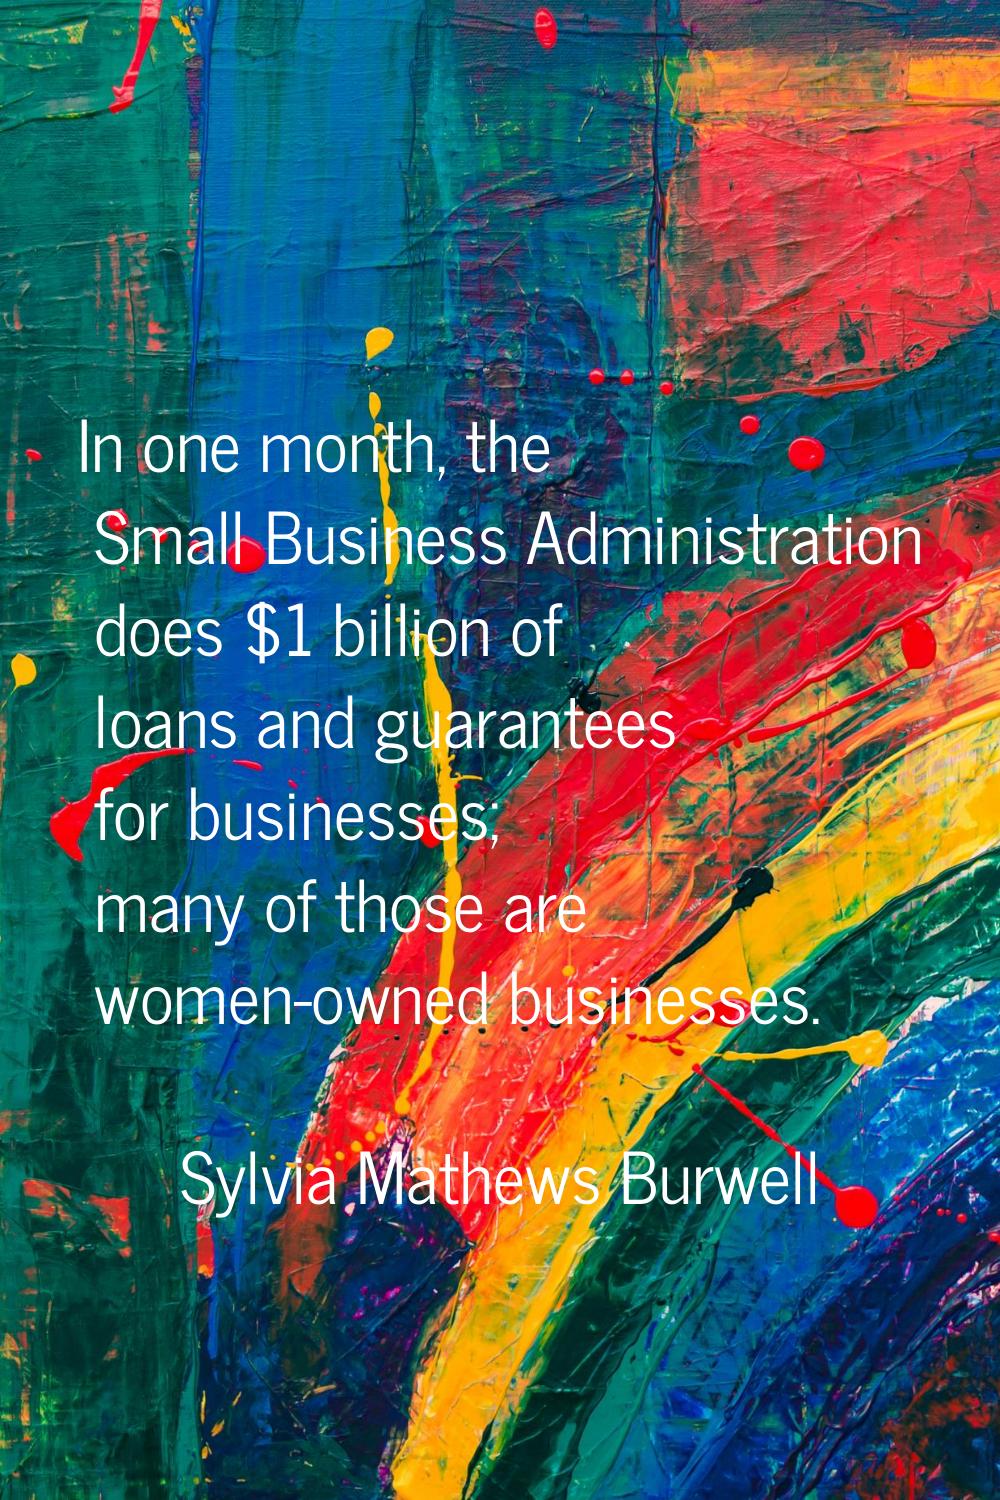 In one month, the Small Business Administration does $1 billion of loans and guarantees for busines